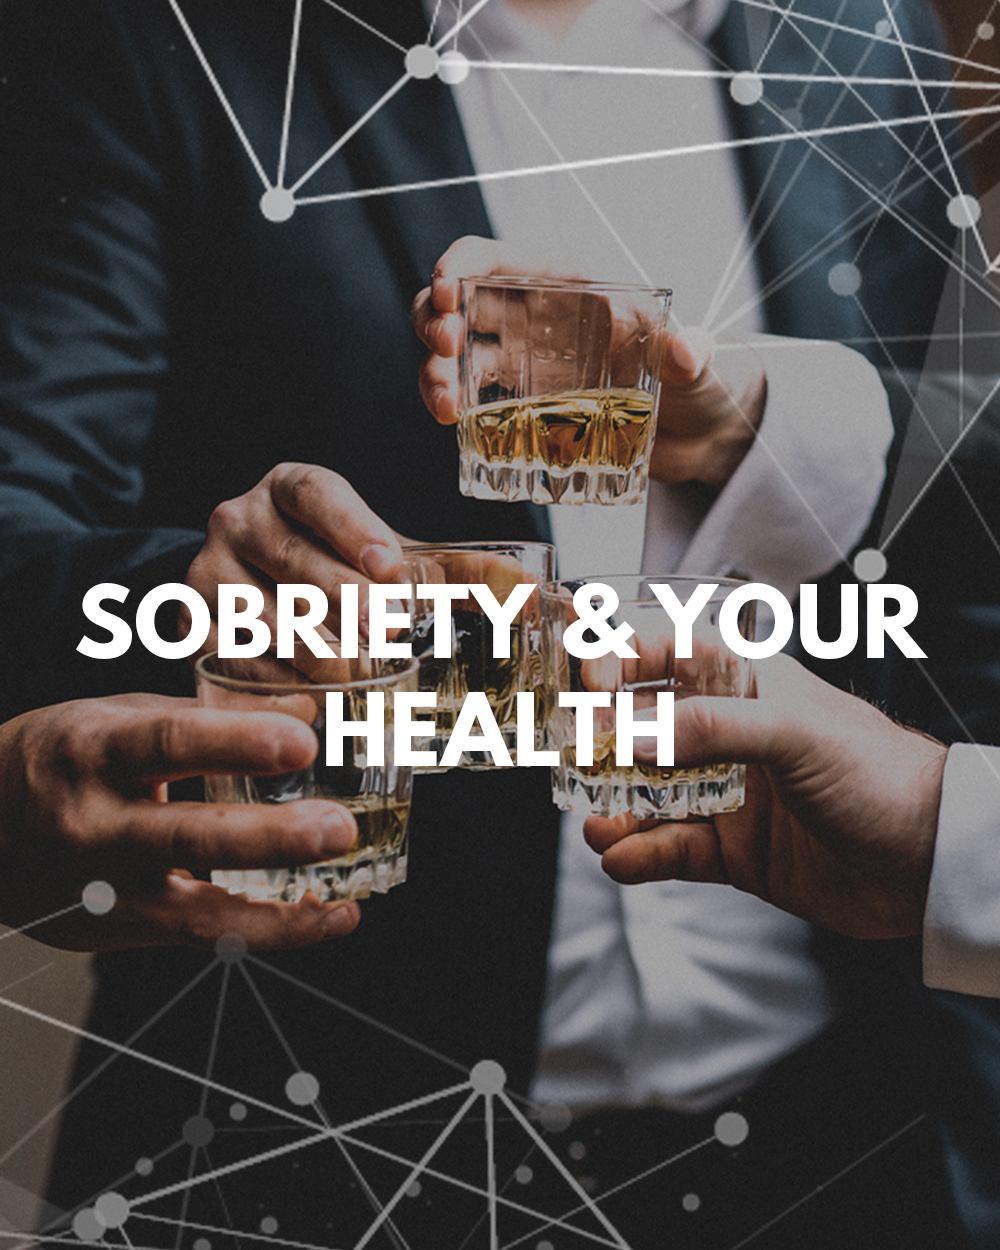 sobriety, dry july, dry january, quit drinking, stop withdrawal symptoms, Peptides Direct, RegenMed, buy peptides online australia